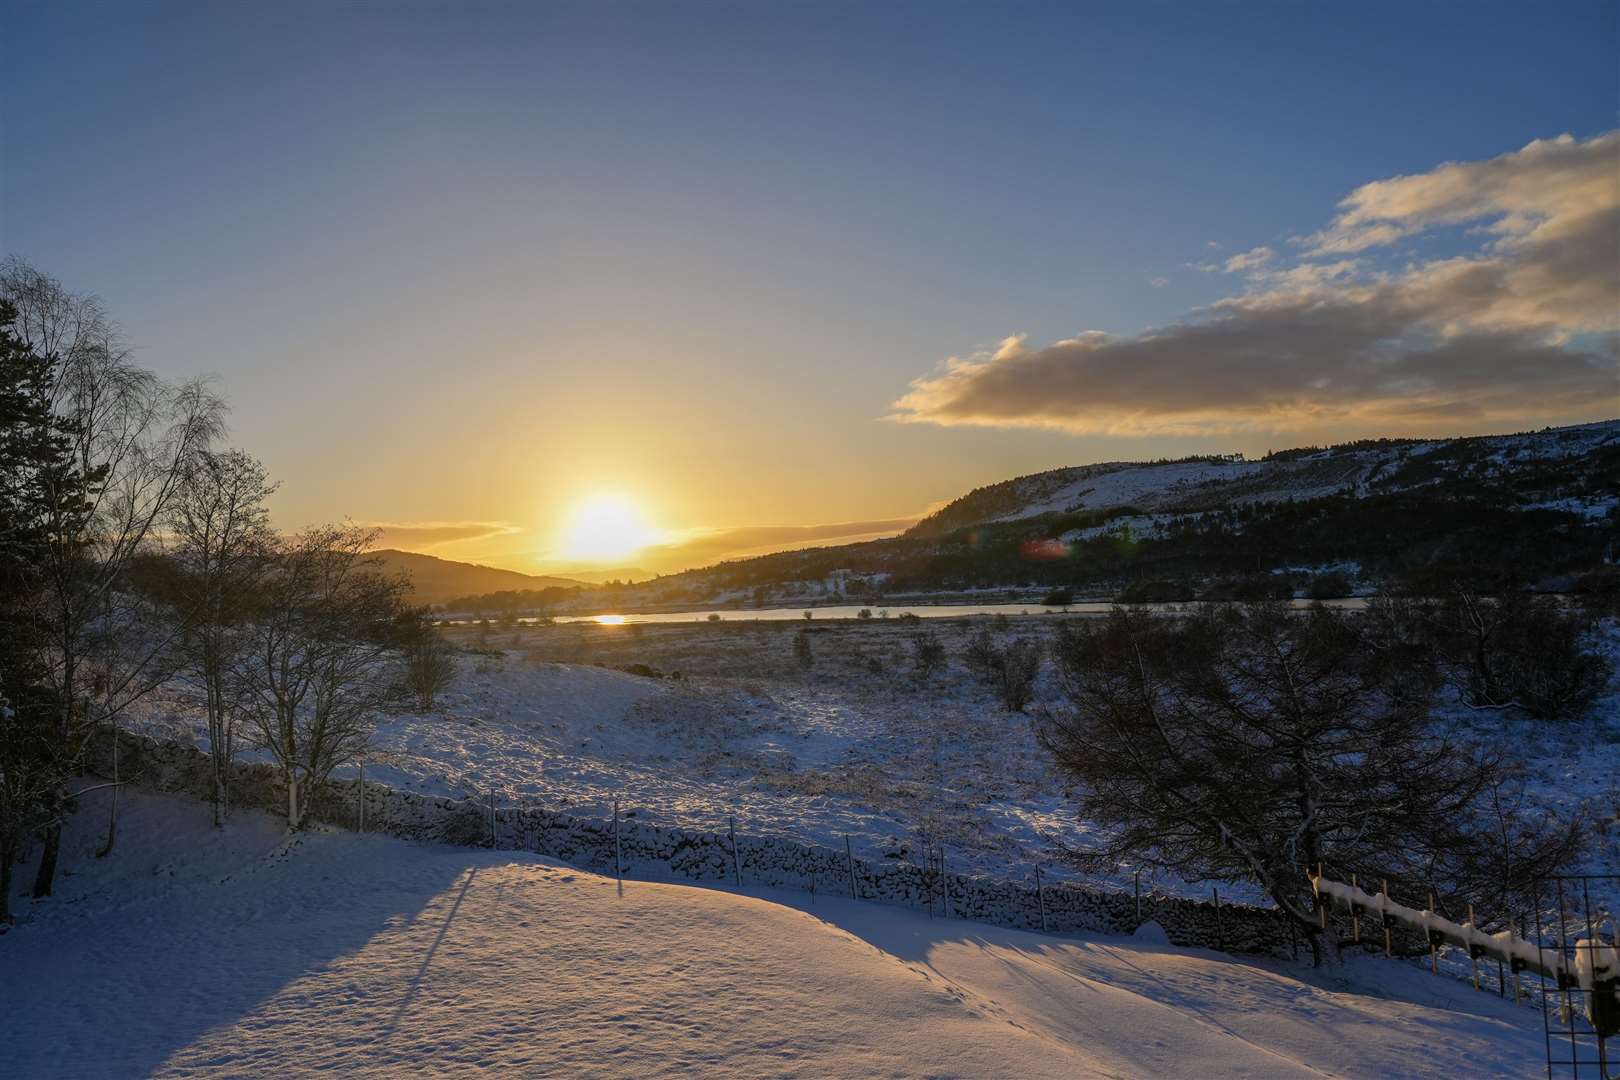 Looking out across the flood plains of the Kyle of Sutherland. Photo: Alan West